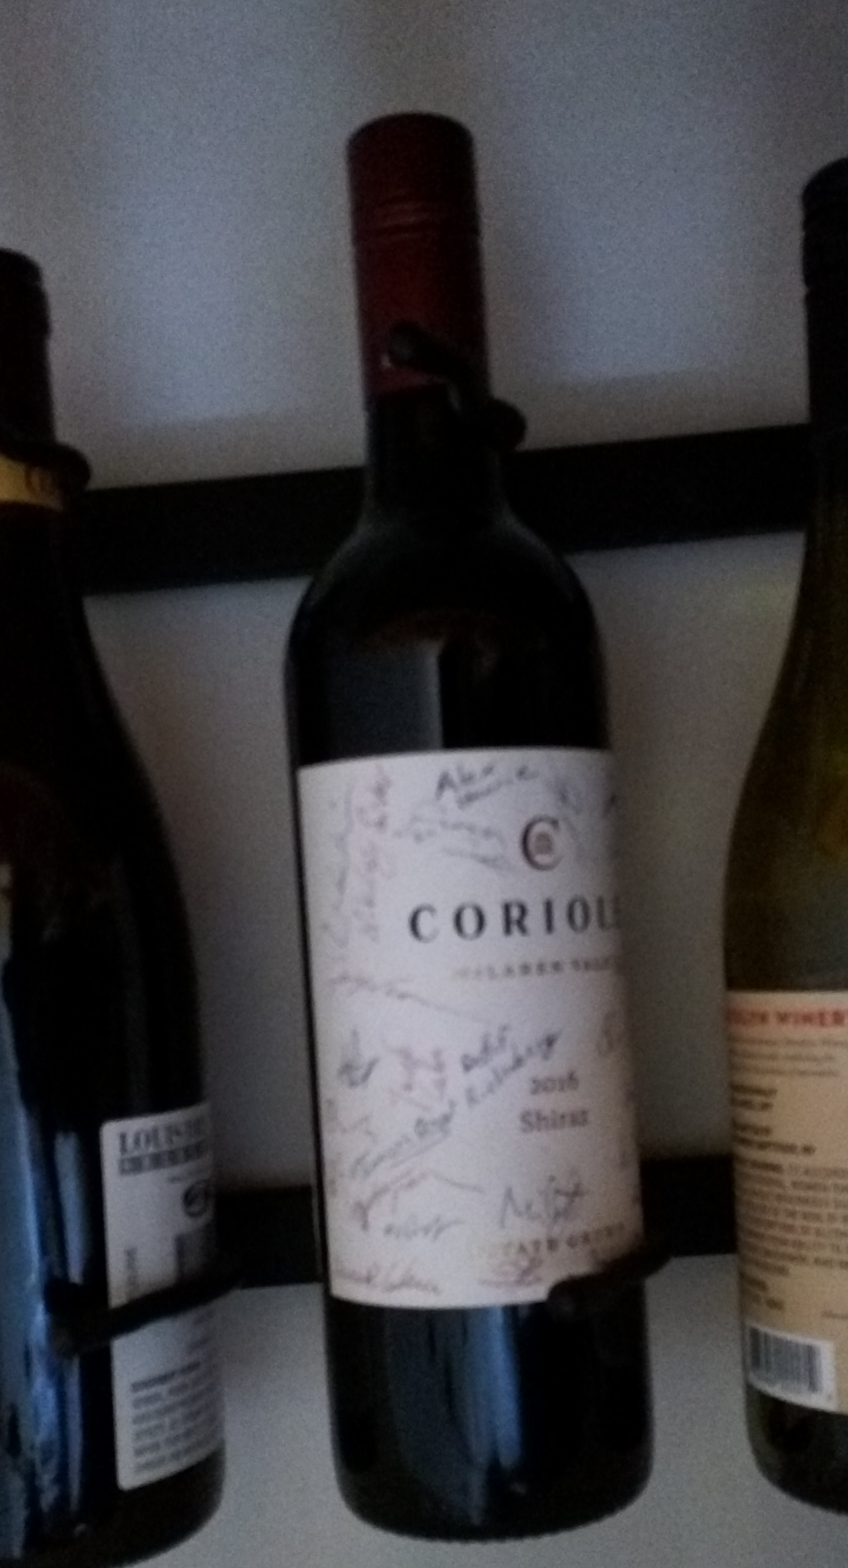 Slightly fuzzy picture of a wine bottle with signatures on it